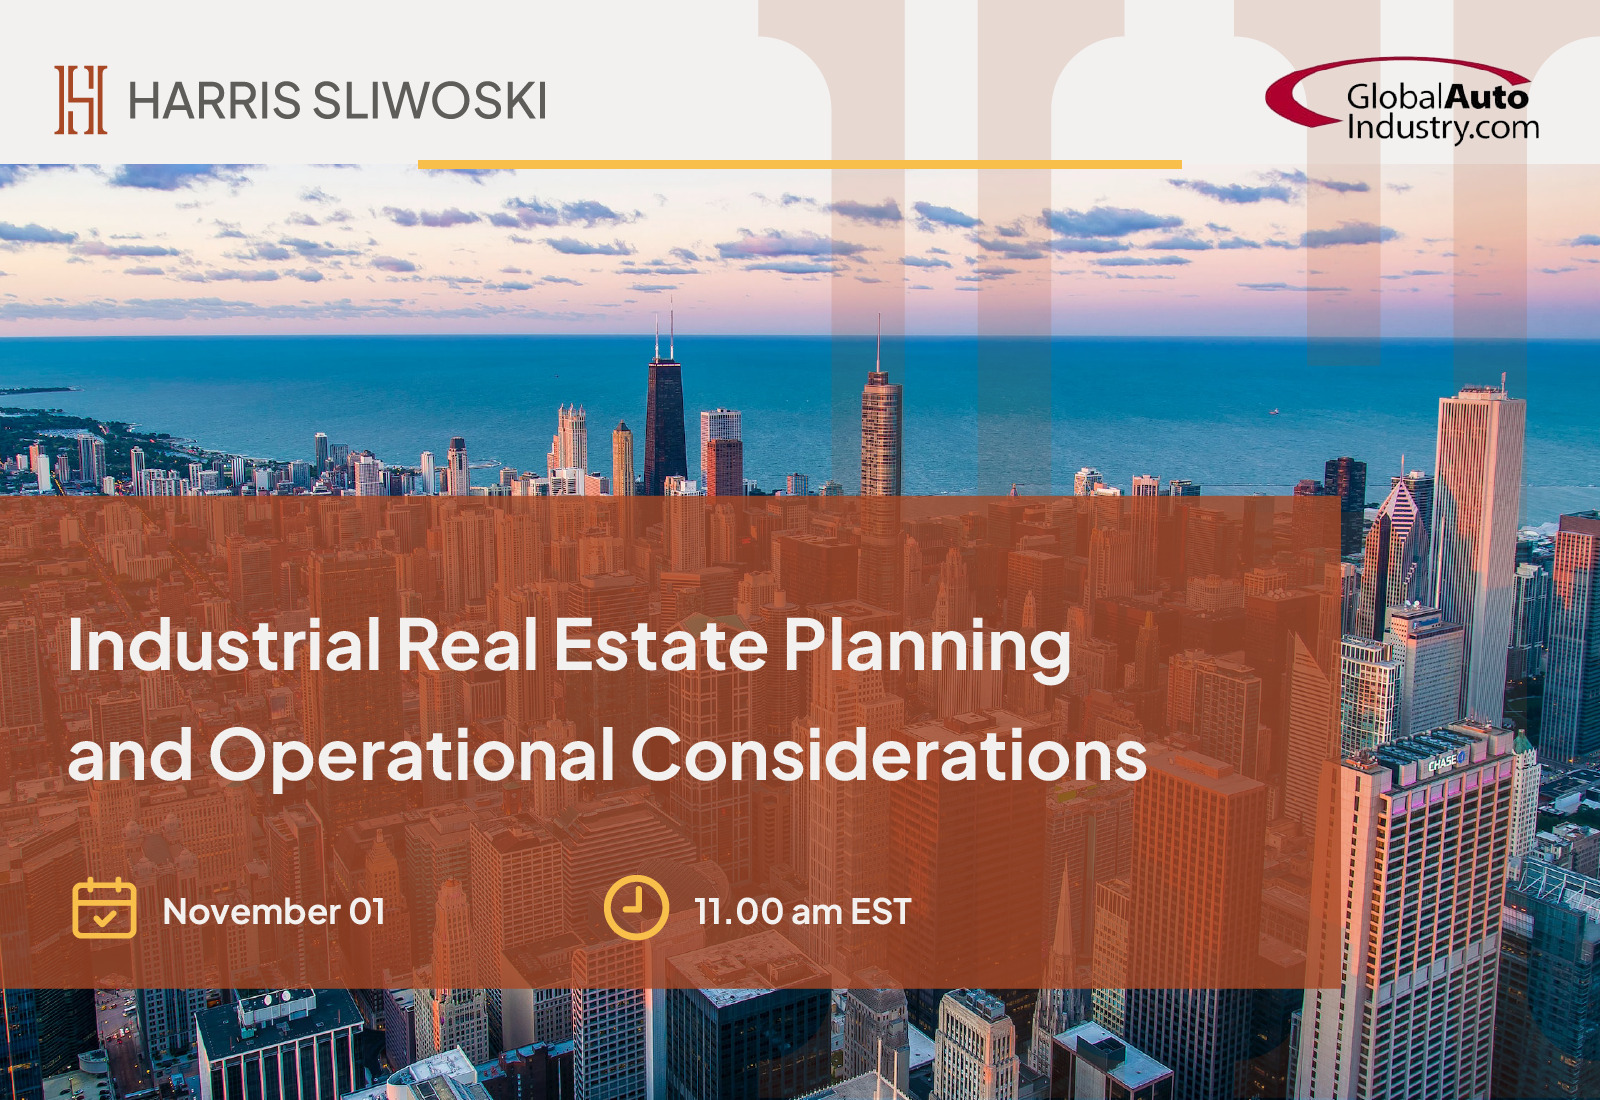 Week 3: Industrial Real Estate Planning and Operational Considerations